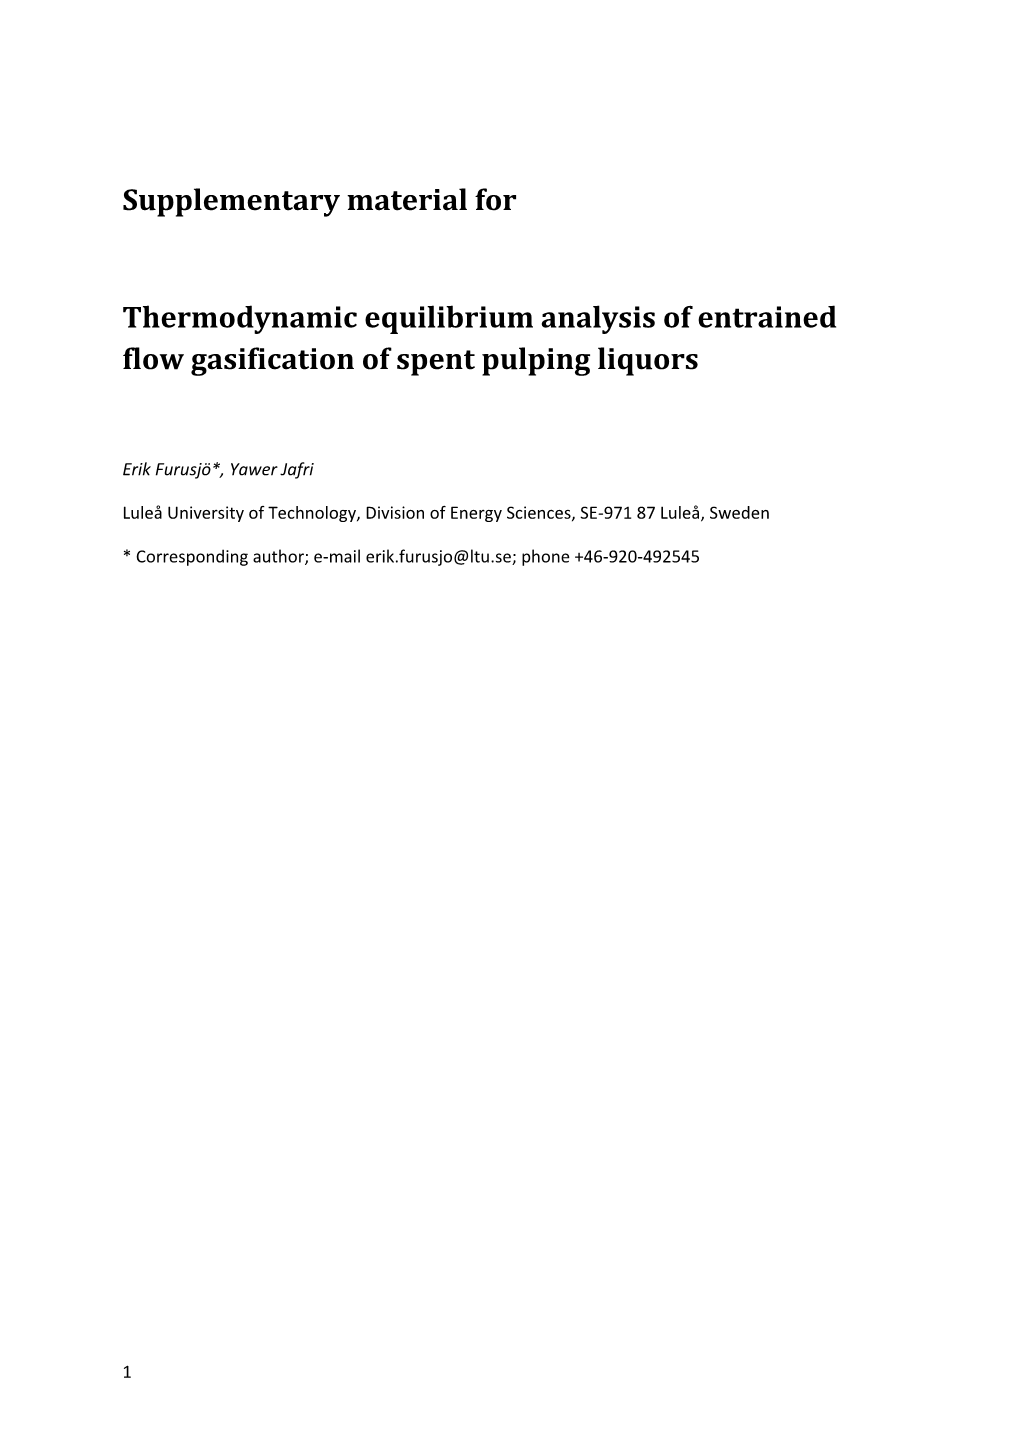 Thermodynamic Equilibrium Analysis of Entrained Flow Gasification of Spent Pulping Liquors